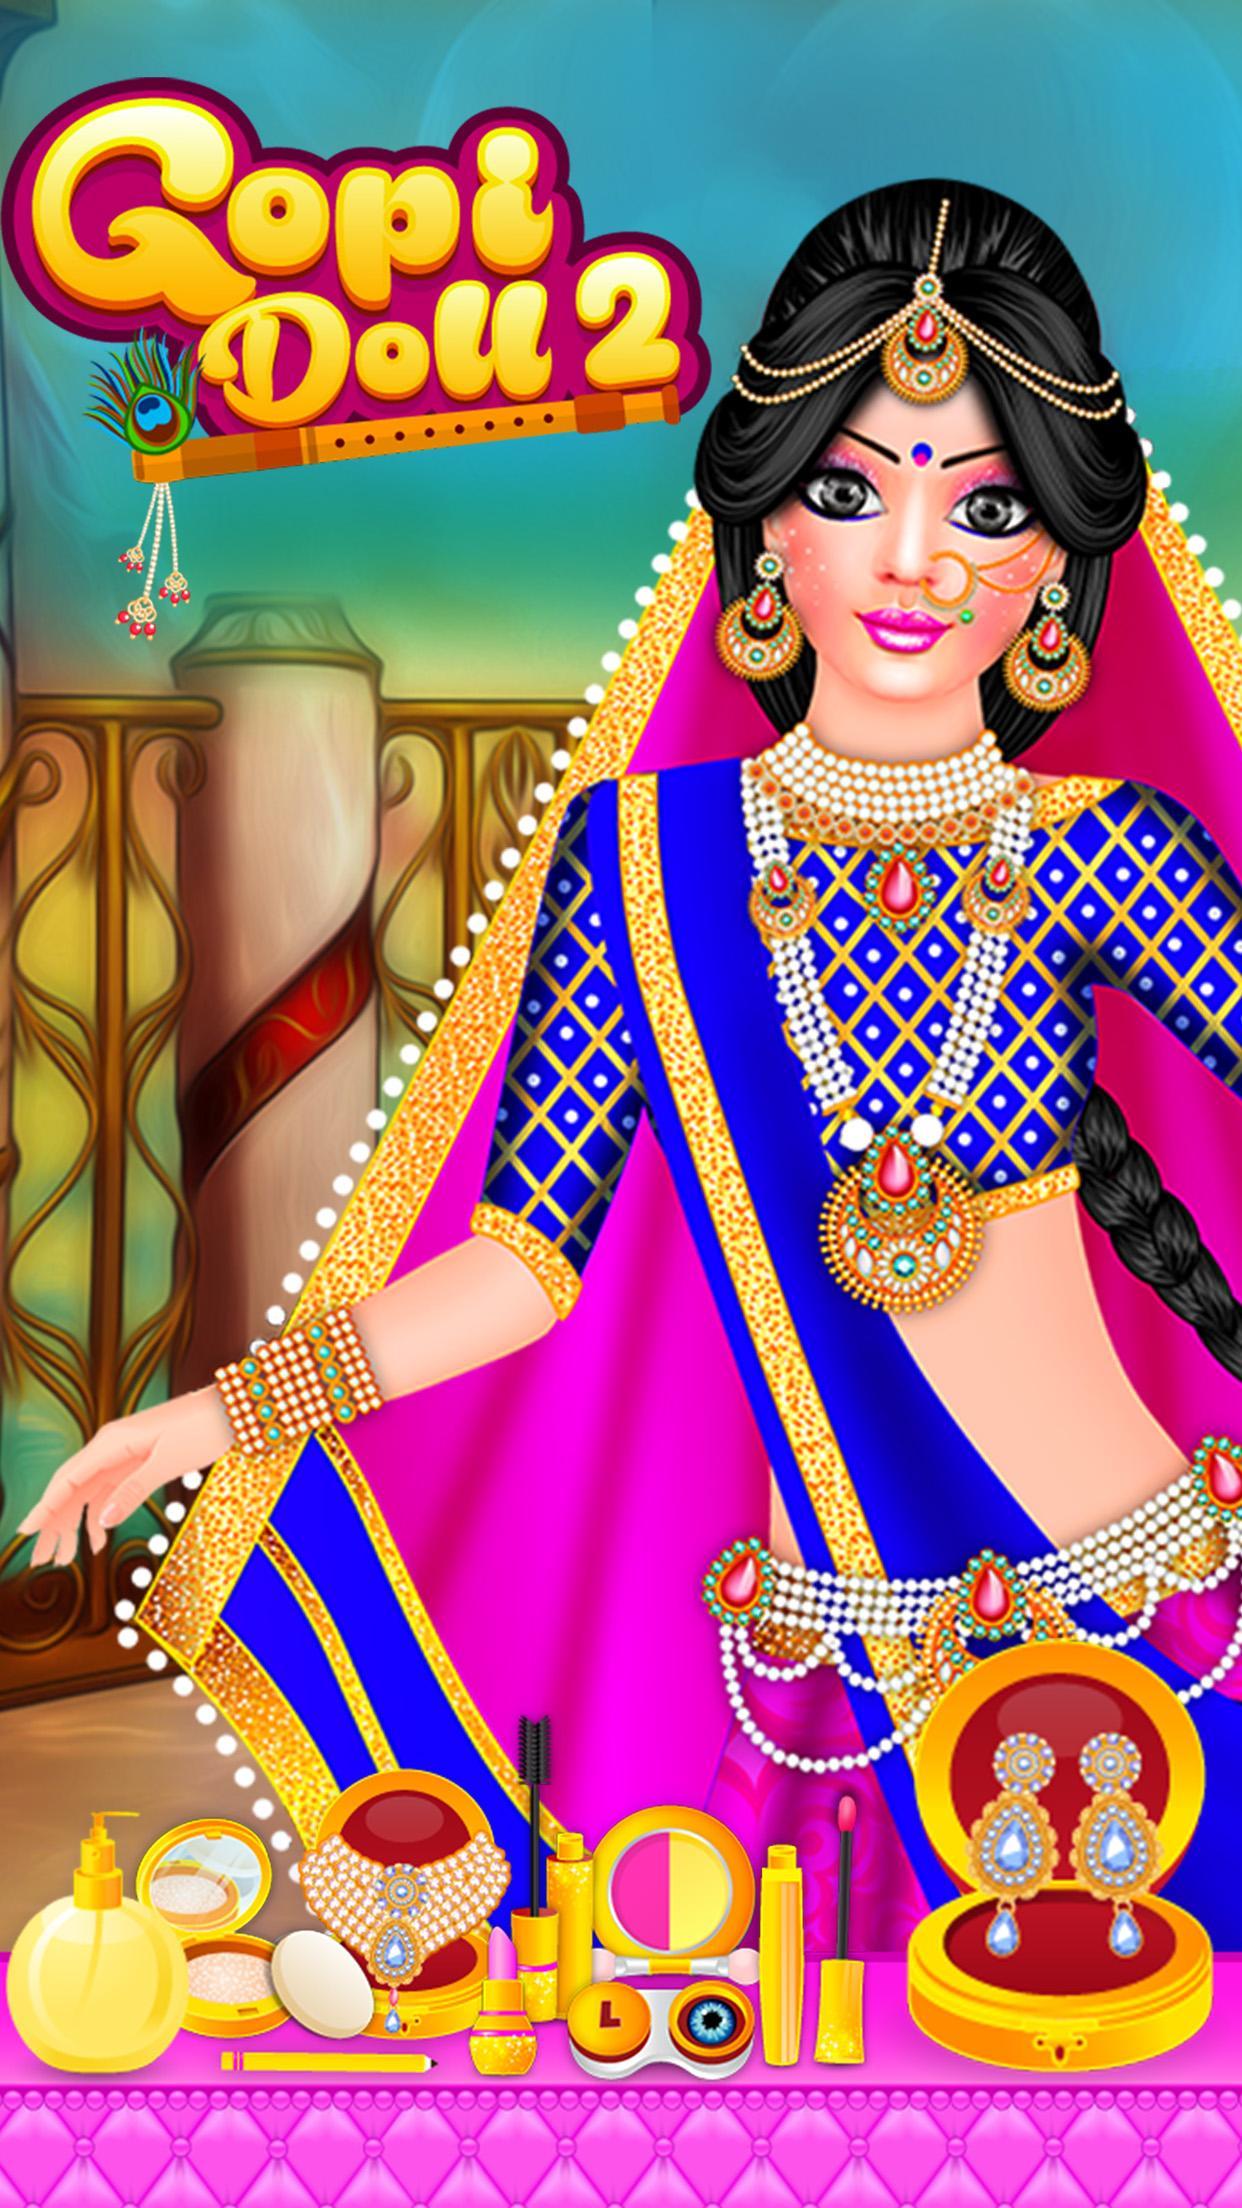 Gopi Doll Fashion Salon 2 for Android - APK Download